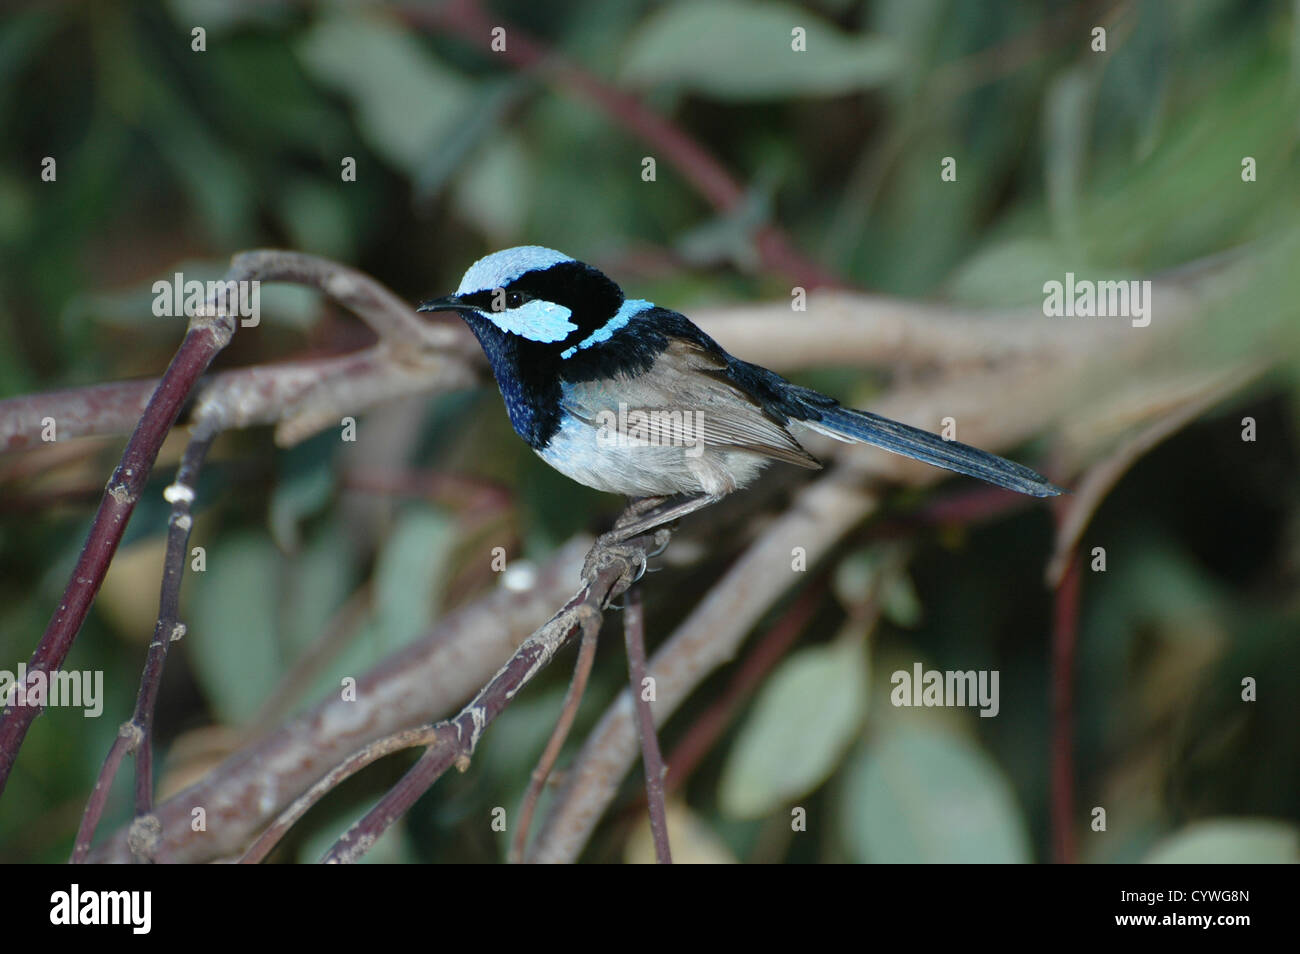 Male Superb Fairy Wren on a tree branch Stock Photo